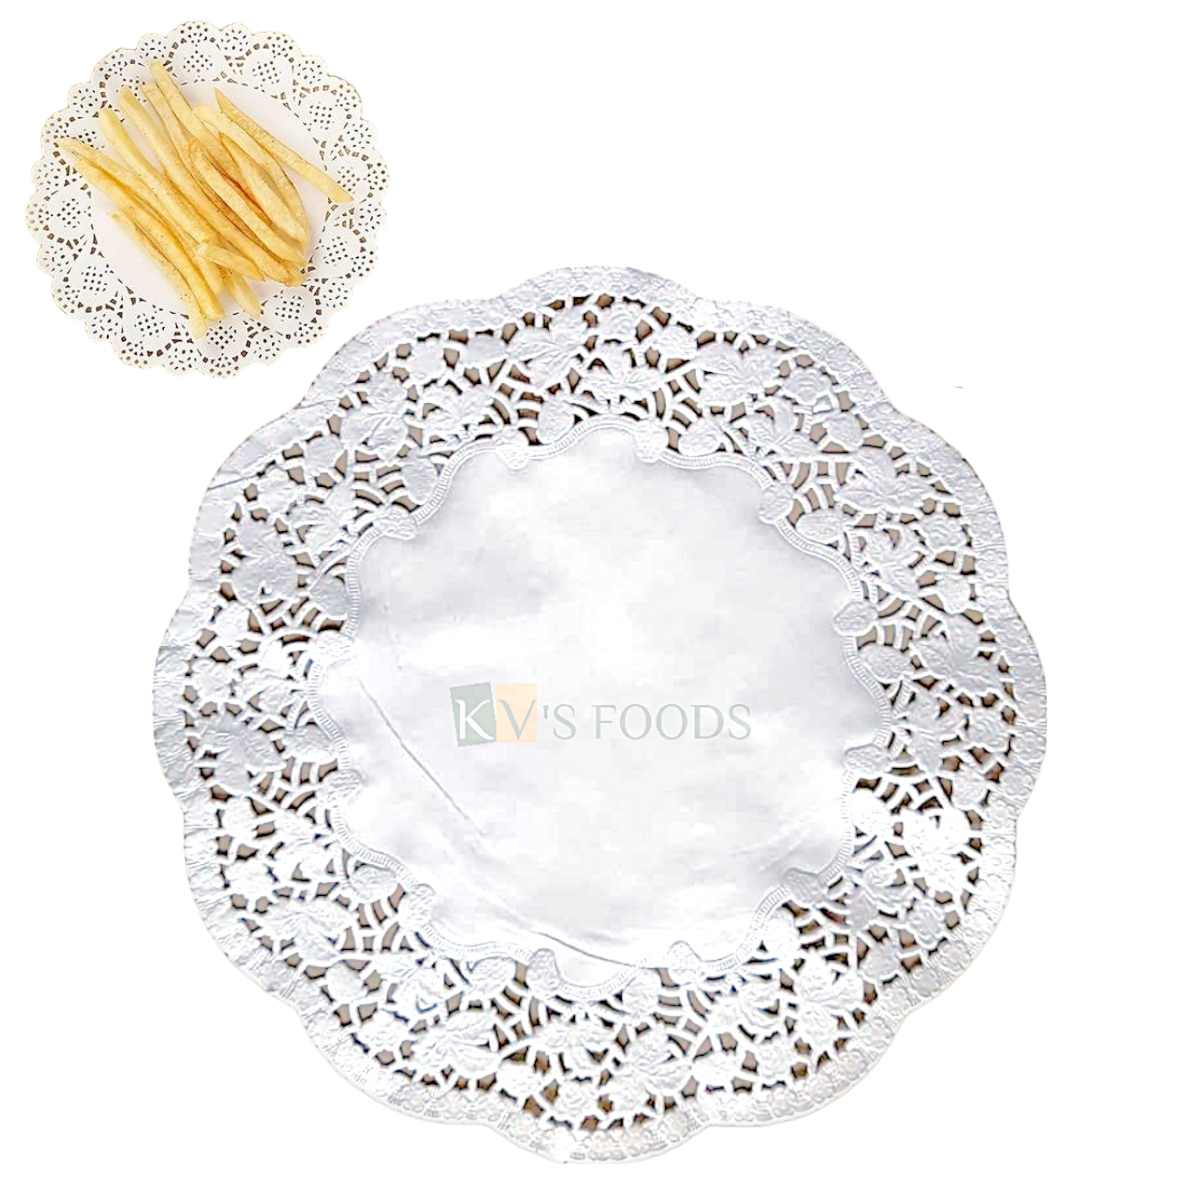 1 Packet White Round Doilies Laces Paper 40 Nos. Size 7.5 Inches, Disposable Doyleys Paper for Cakes Finger Food Snacks, Muffins Cupcakes Desserts Pastries Birthday Party Weddings Oil Absorbing Paper